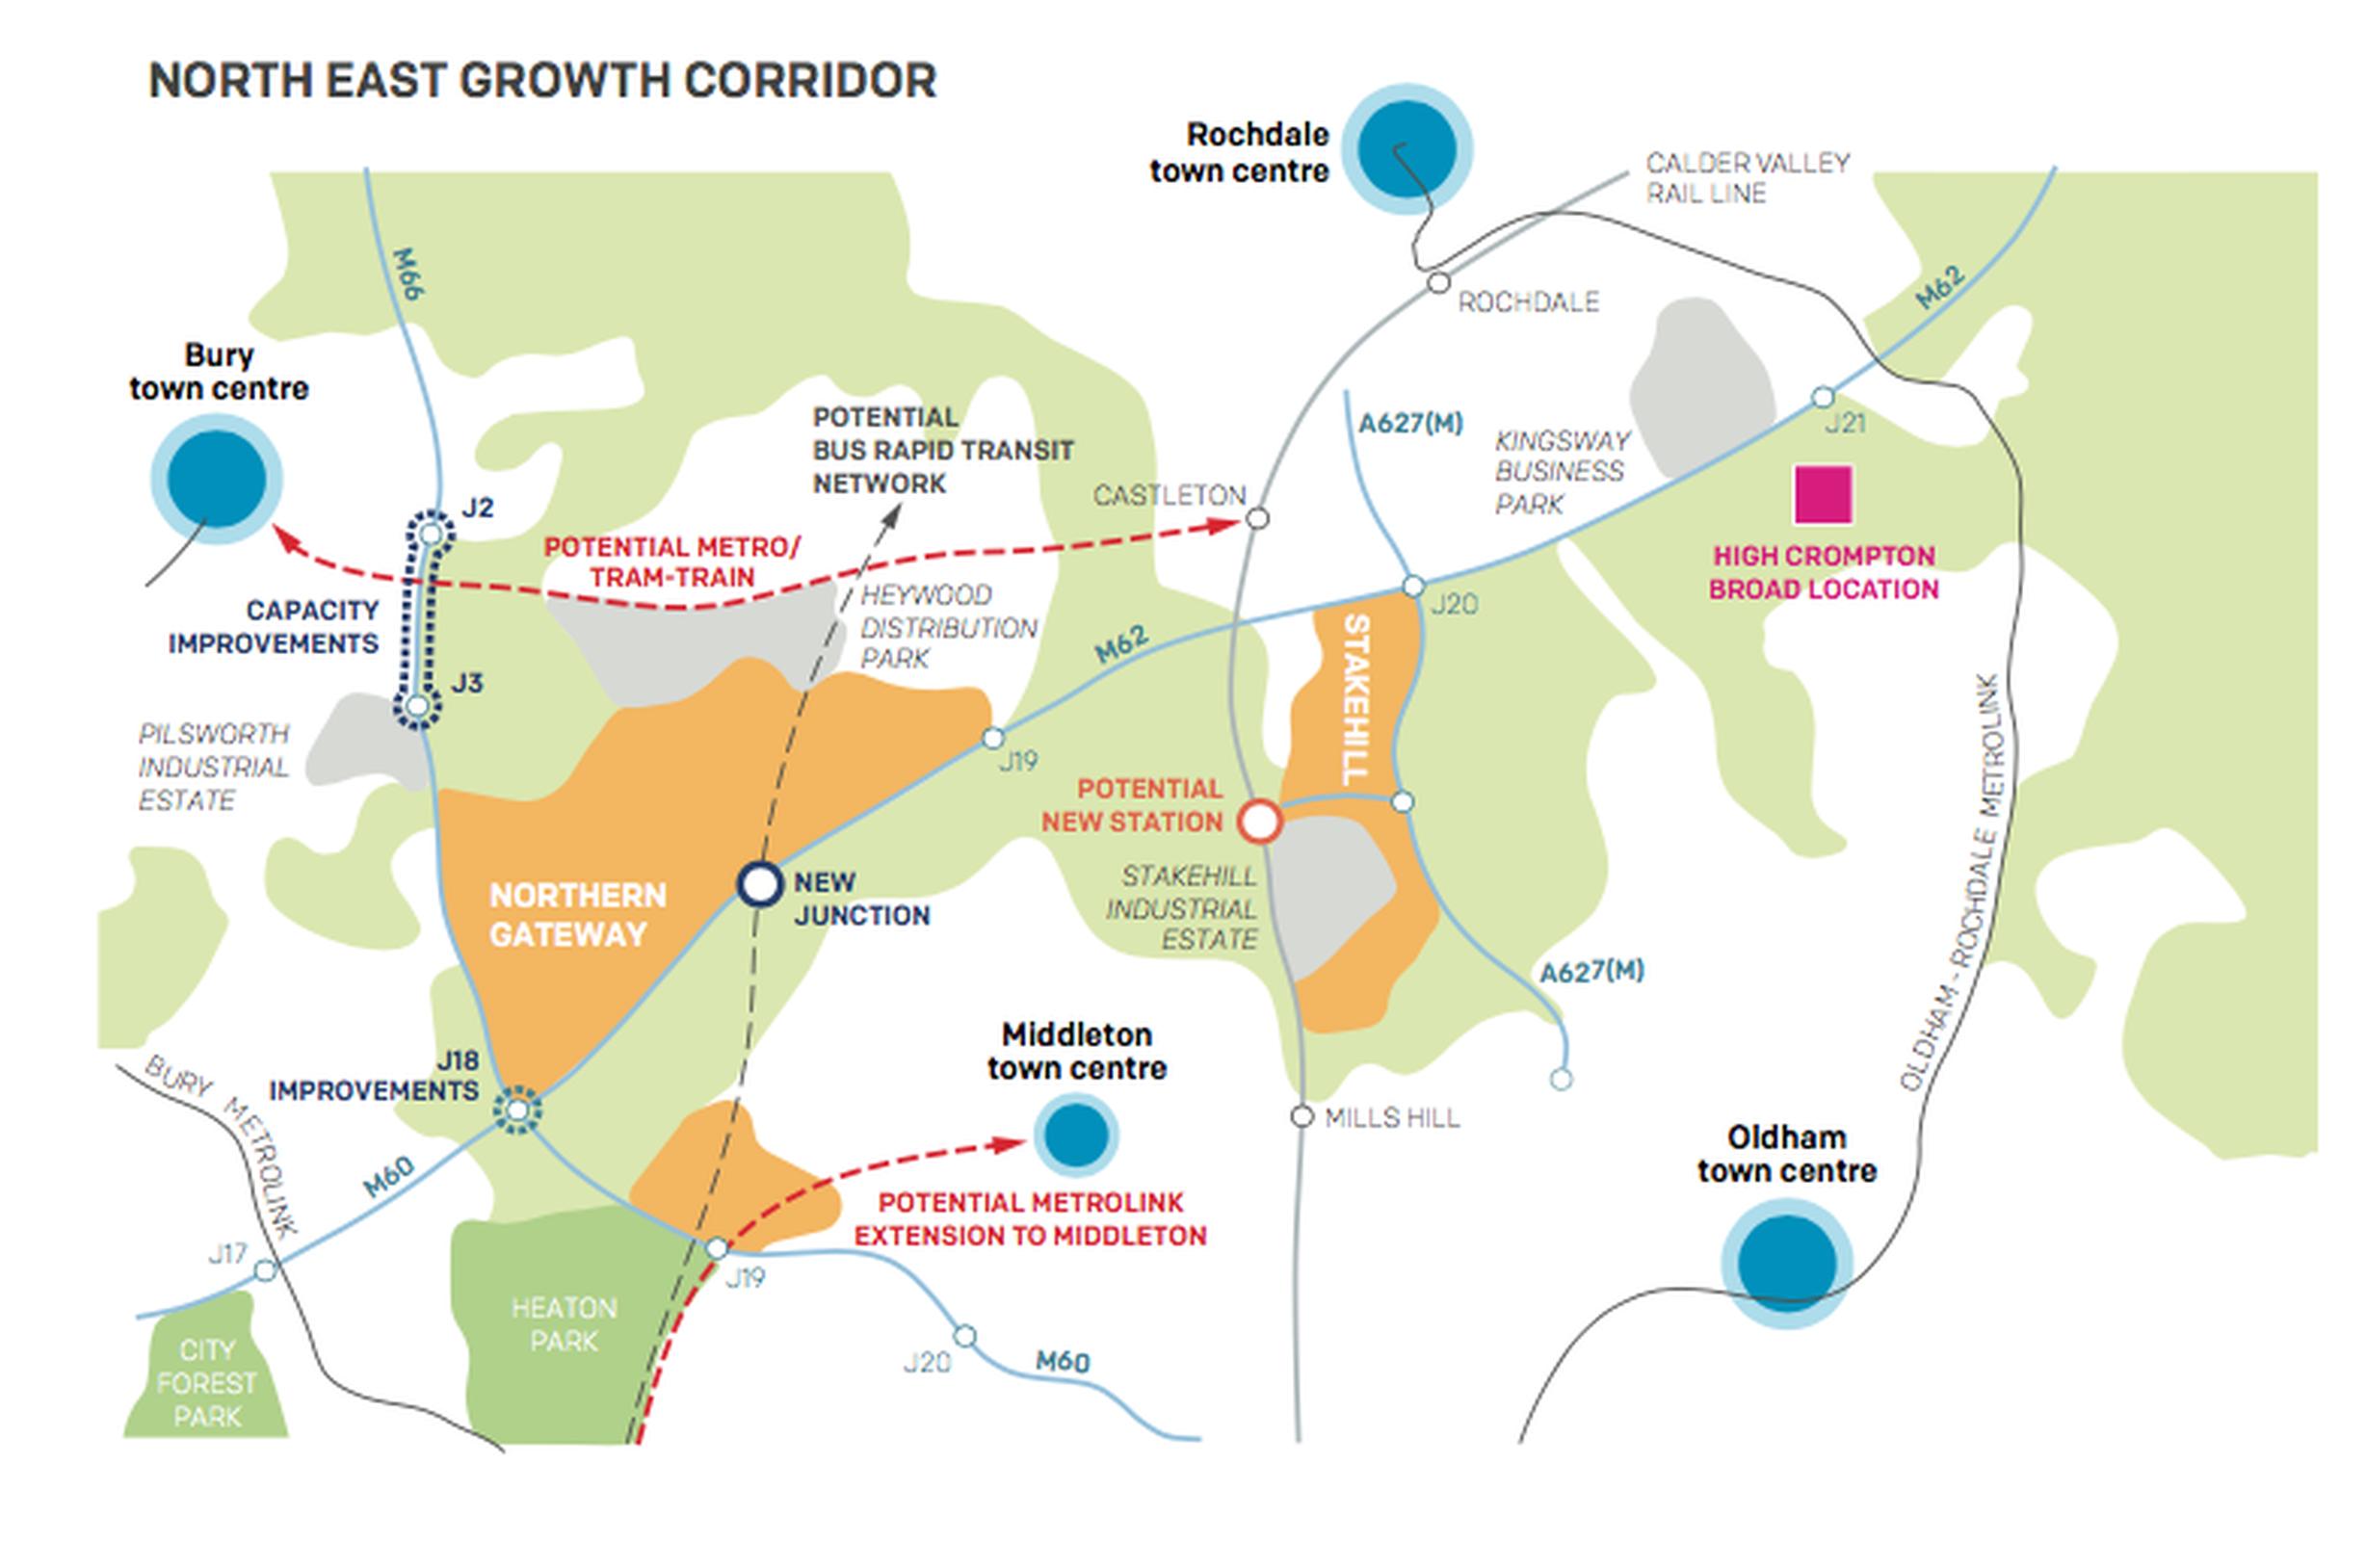 The northeast growth corridor (top) is focused on the M62. Major transport improvements are planned to support the economy of the airport and its surroundings in the south (bottom)